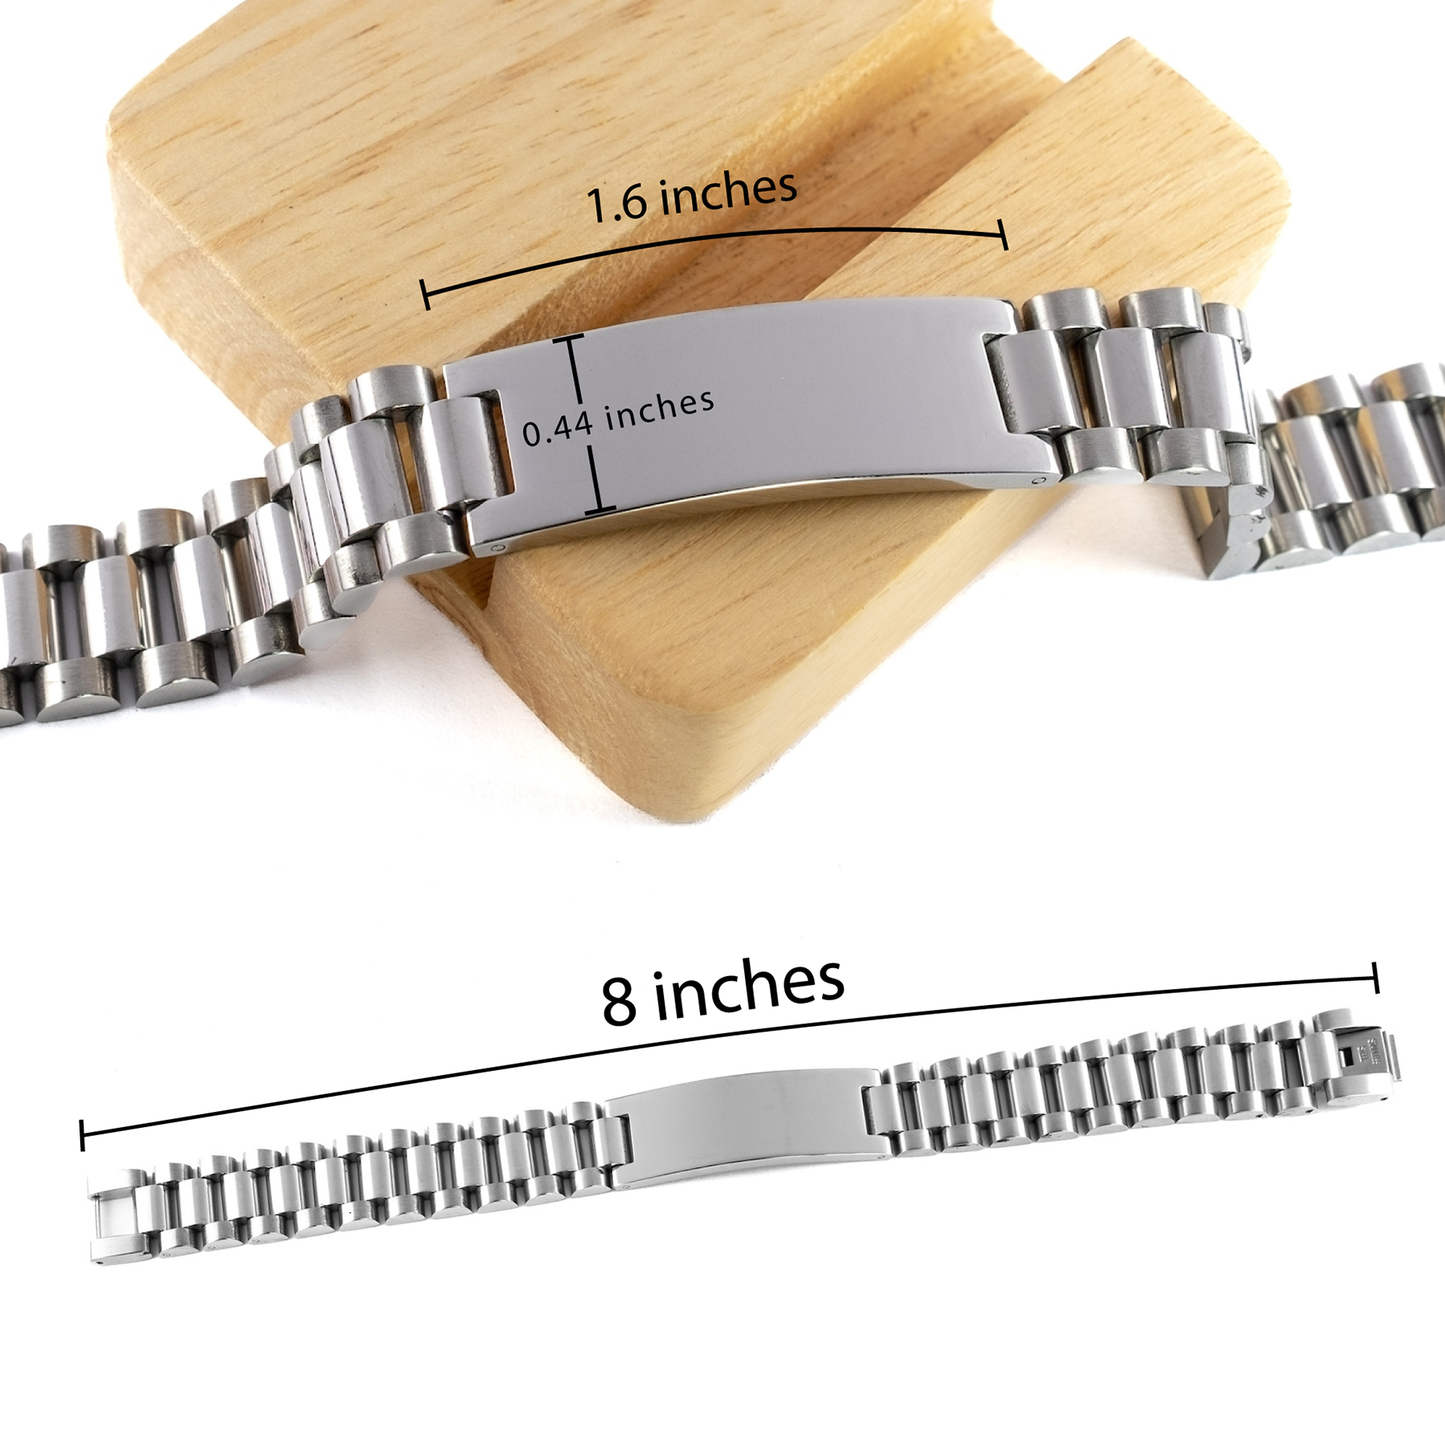 Brother-In-Law Engraved Ladder Stainless Steel Bracelet Specialty Gift for Him Veterans Day Christmas Graduation Perfect Reminder of Our Special Bond